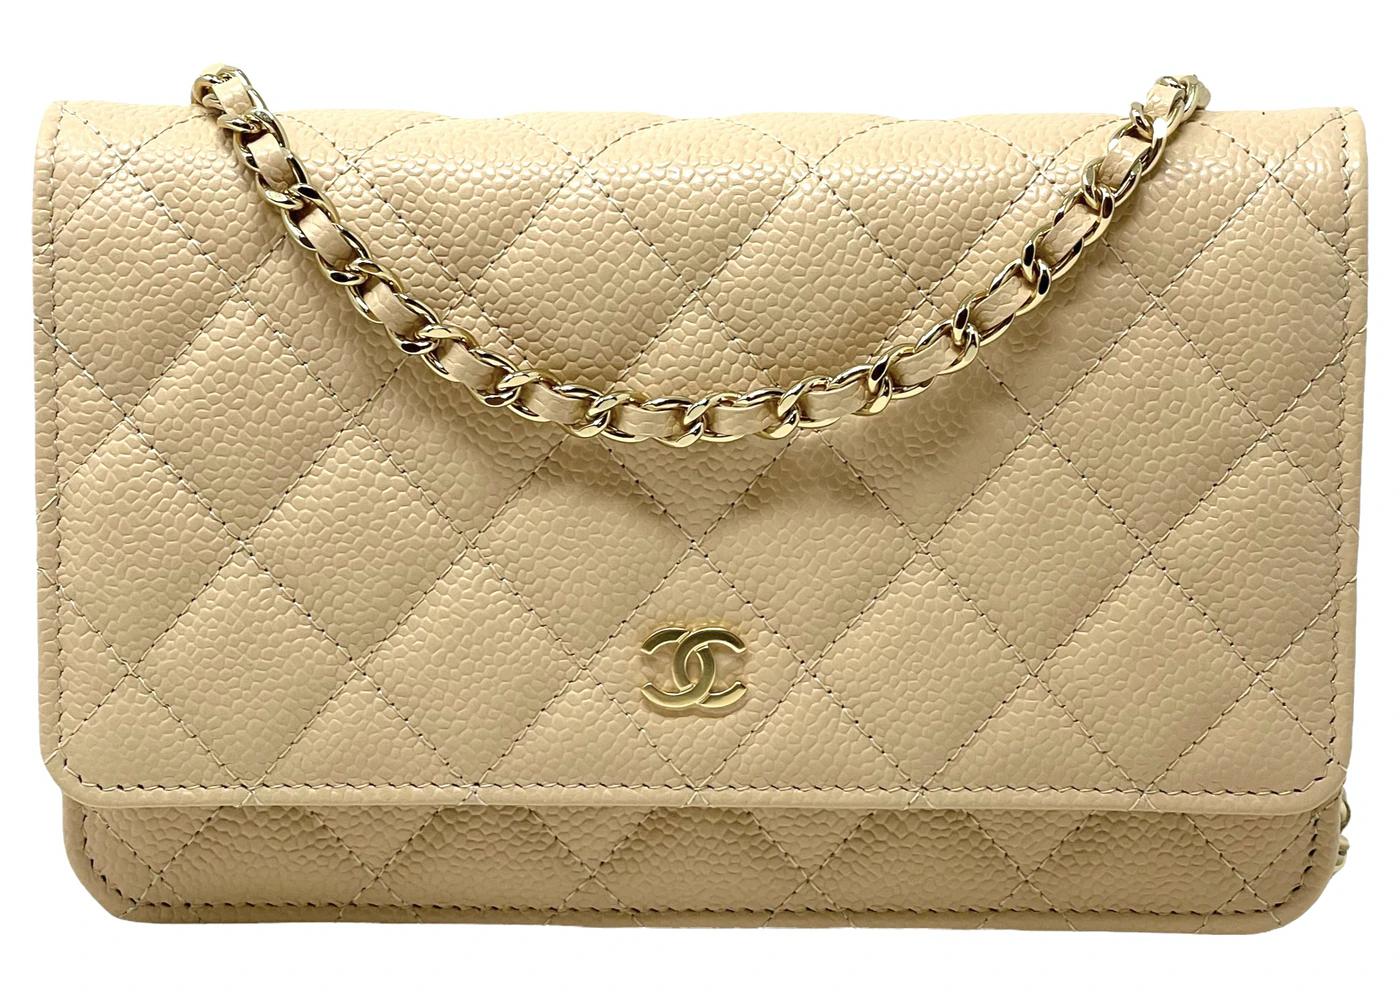 Classic Quilted Caviar Leather WOC Wallet Crossbody Bag Beige by CHANEL